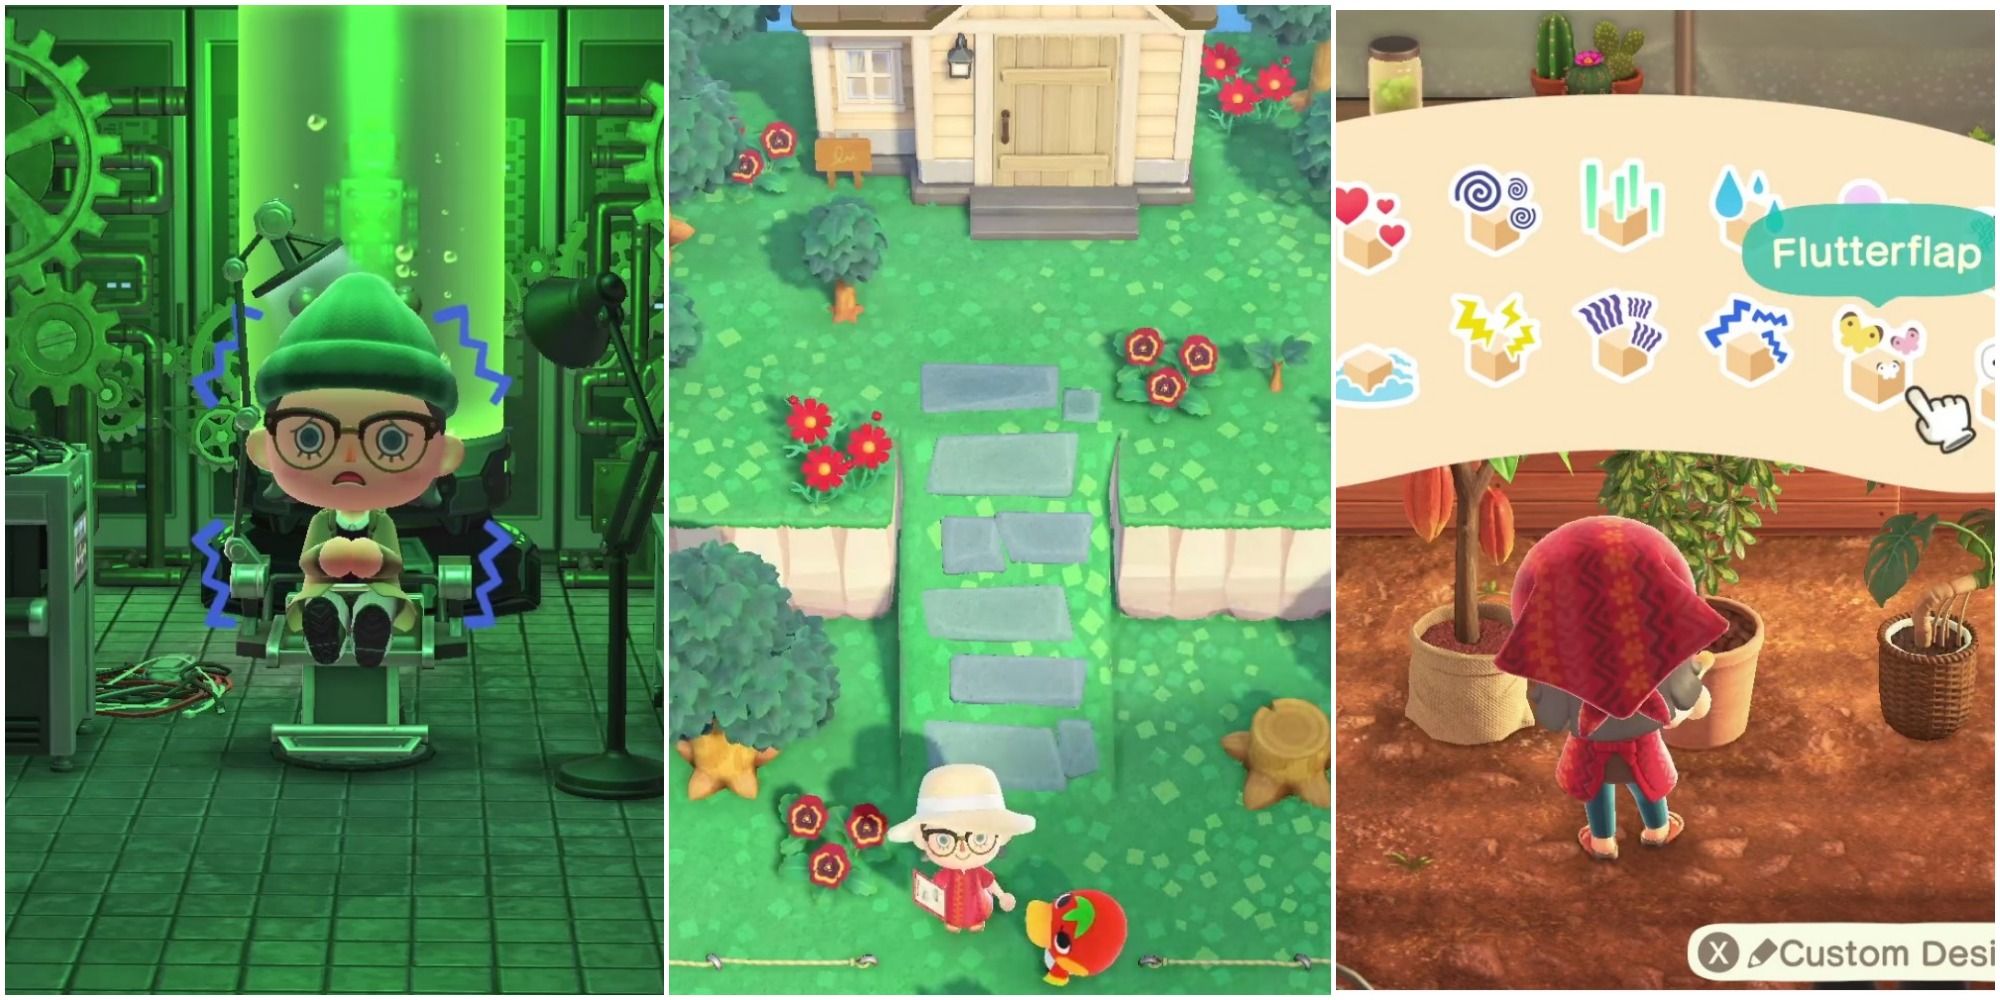 A split image from left to right: a player cowering in fear in a green lit science lab, a player standing at the base of a ramp with a red duck surrounded by flowers and trees, a player in polishing uniform selecting the 